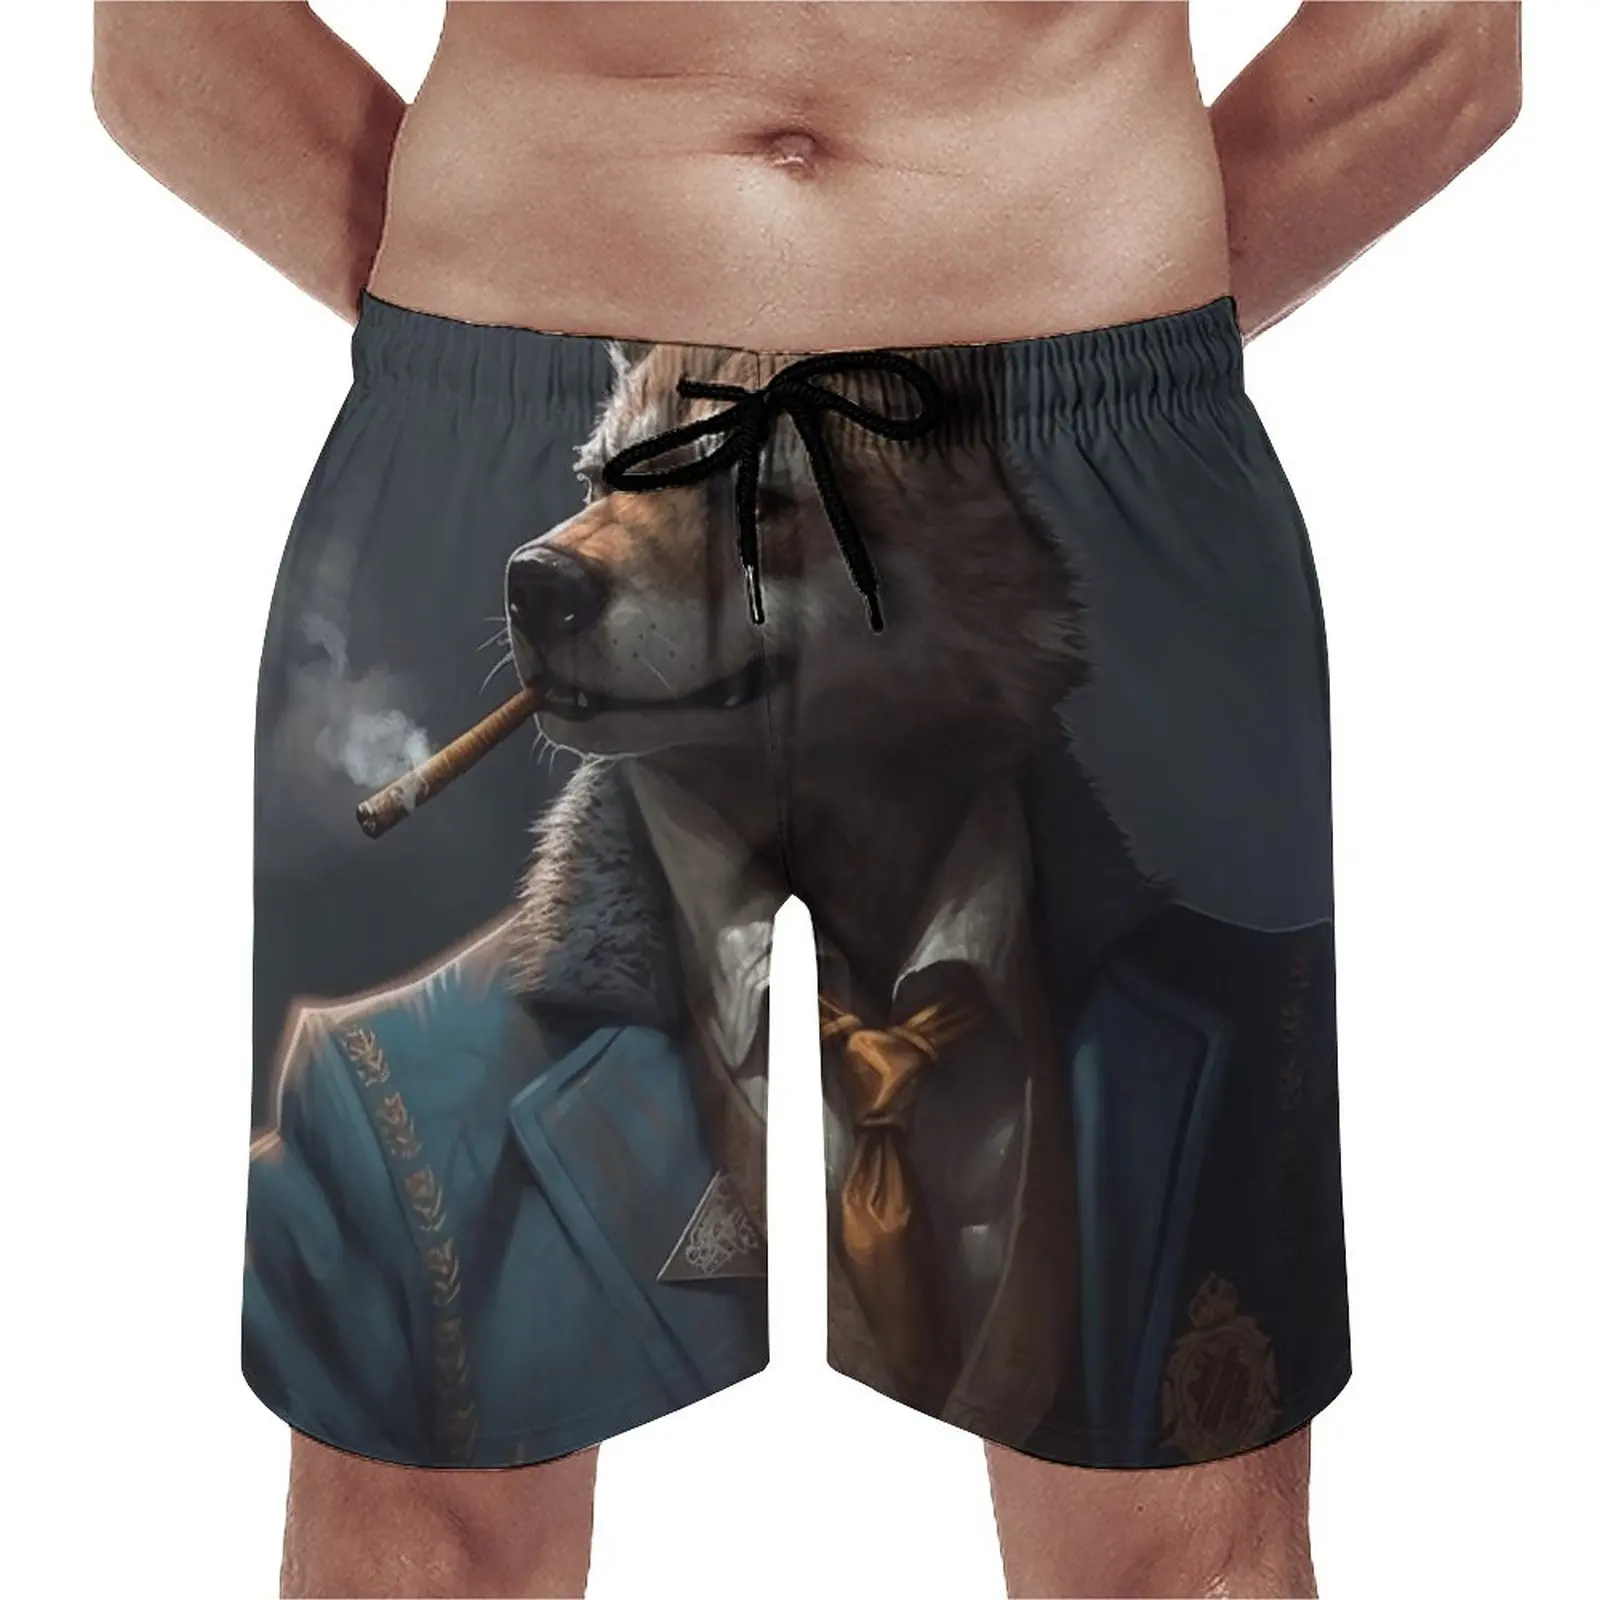 

Board Shorts Wolf Hawaii Beach Trunks Gangster-style Godfather Men's Comfortable Sports Fitness Hot Plus Size Board Short Pants